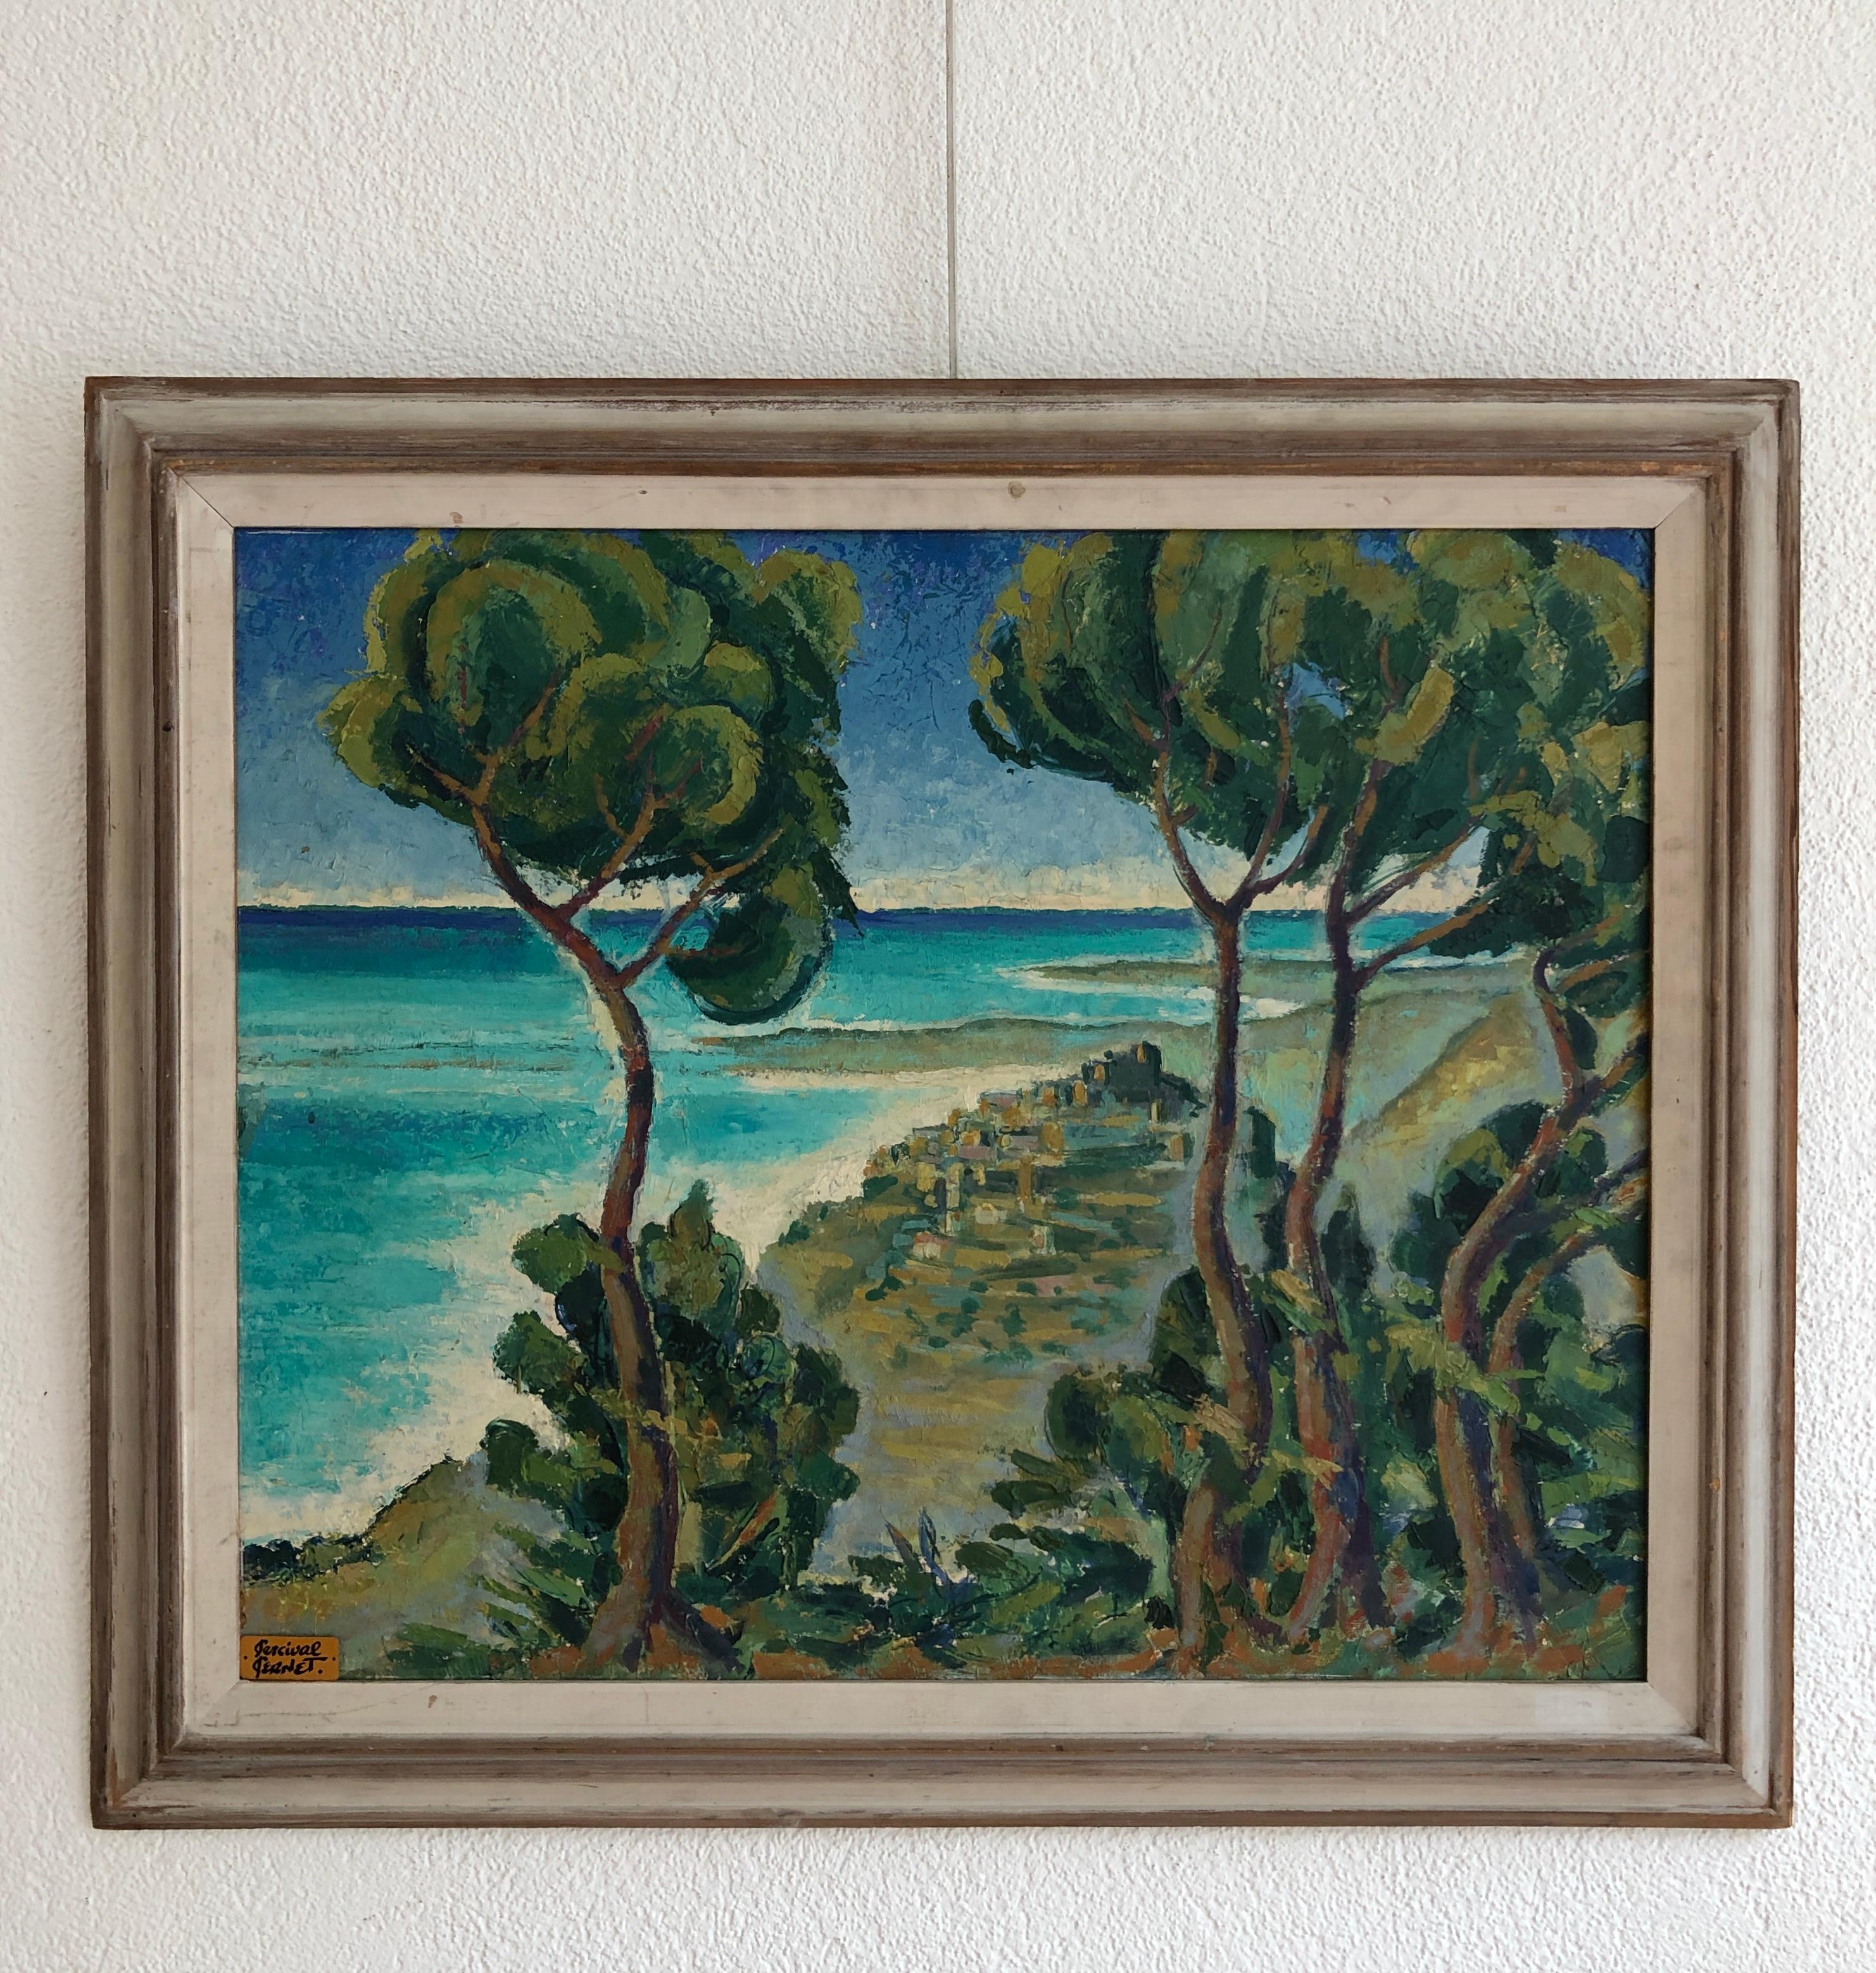 Coast of Èze, French Riviera - Painting by Percival Pernet